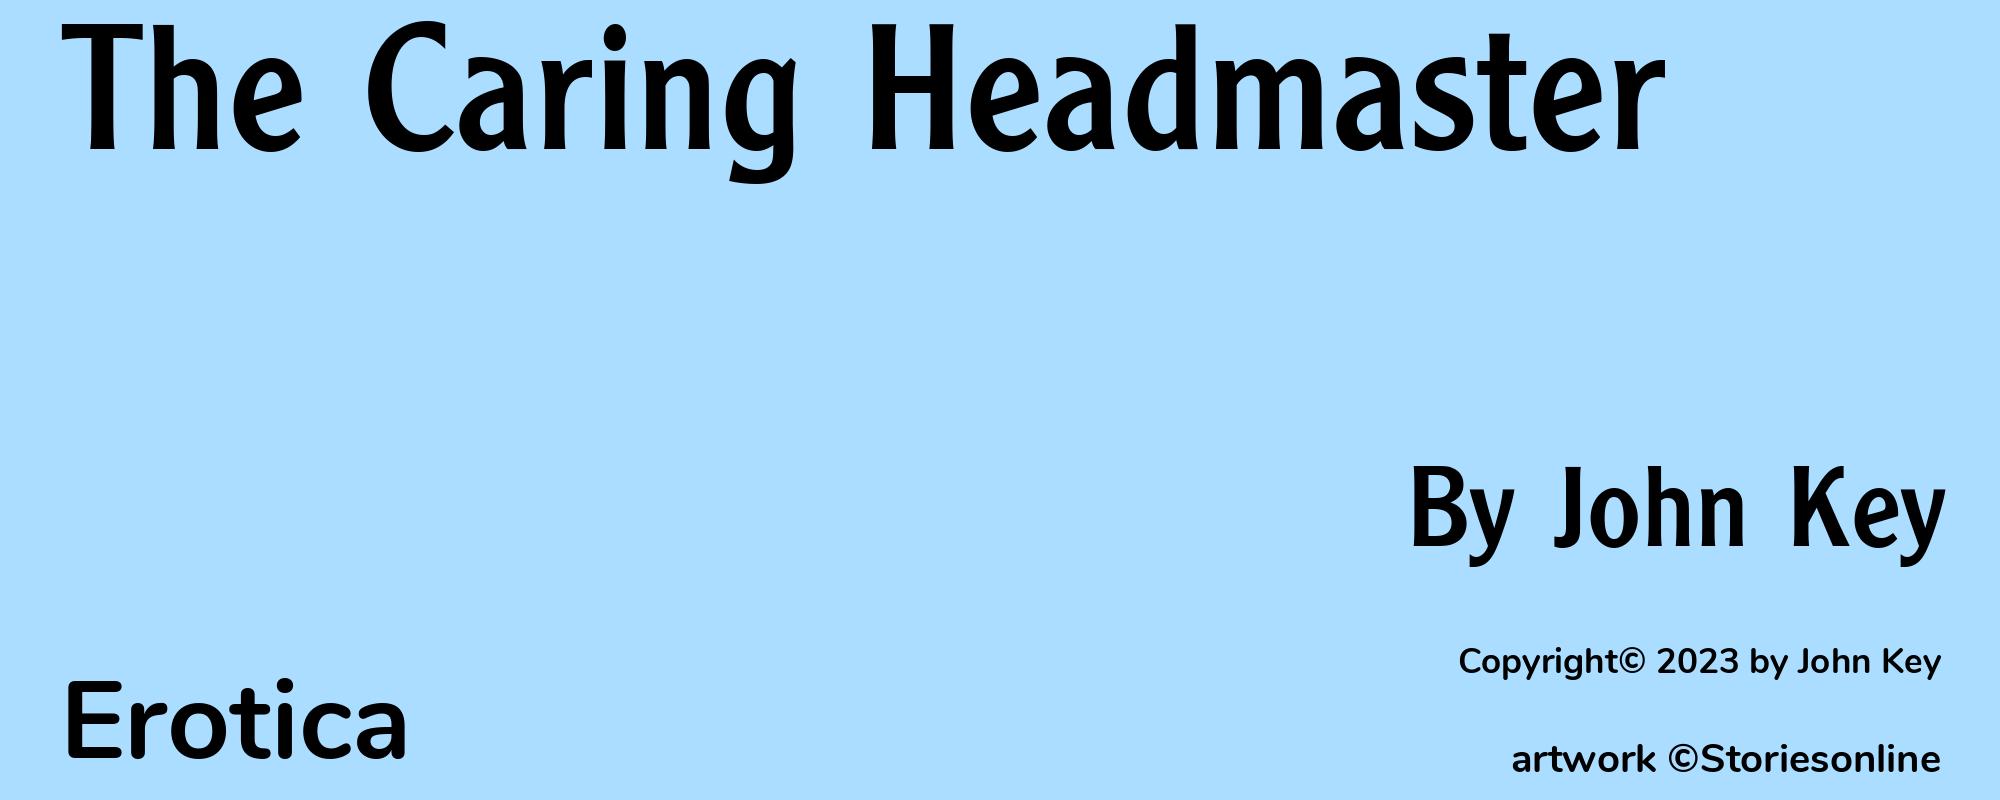 The Caring Headmaster - Cover